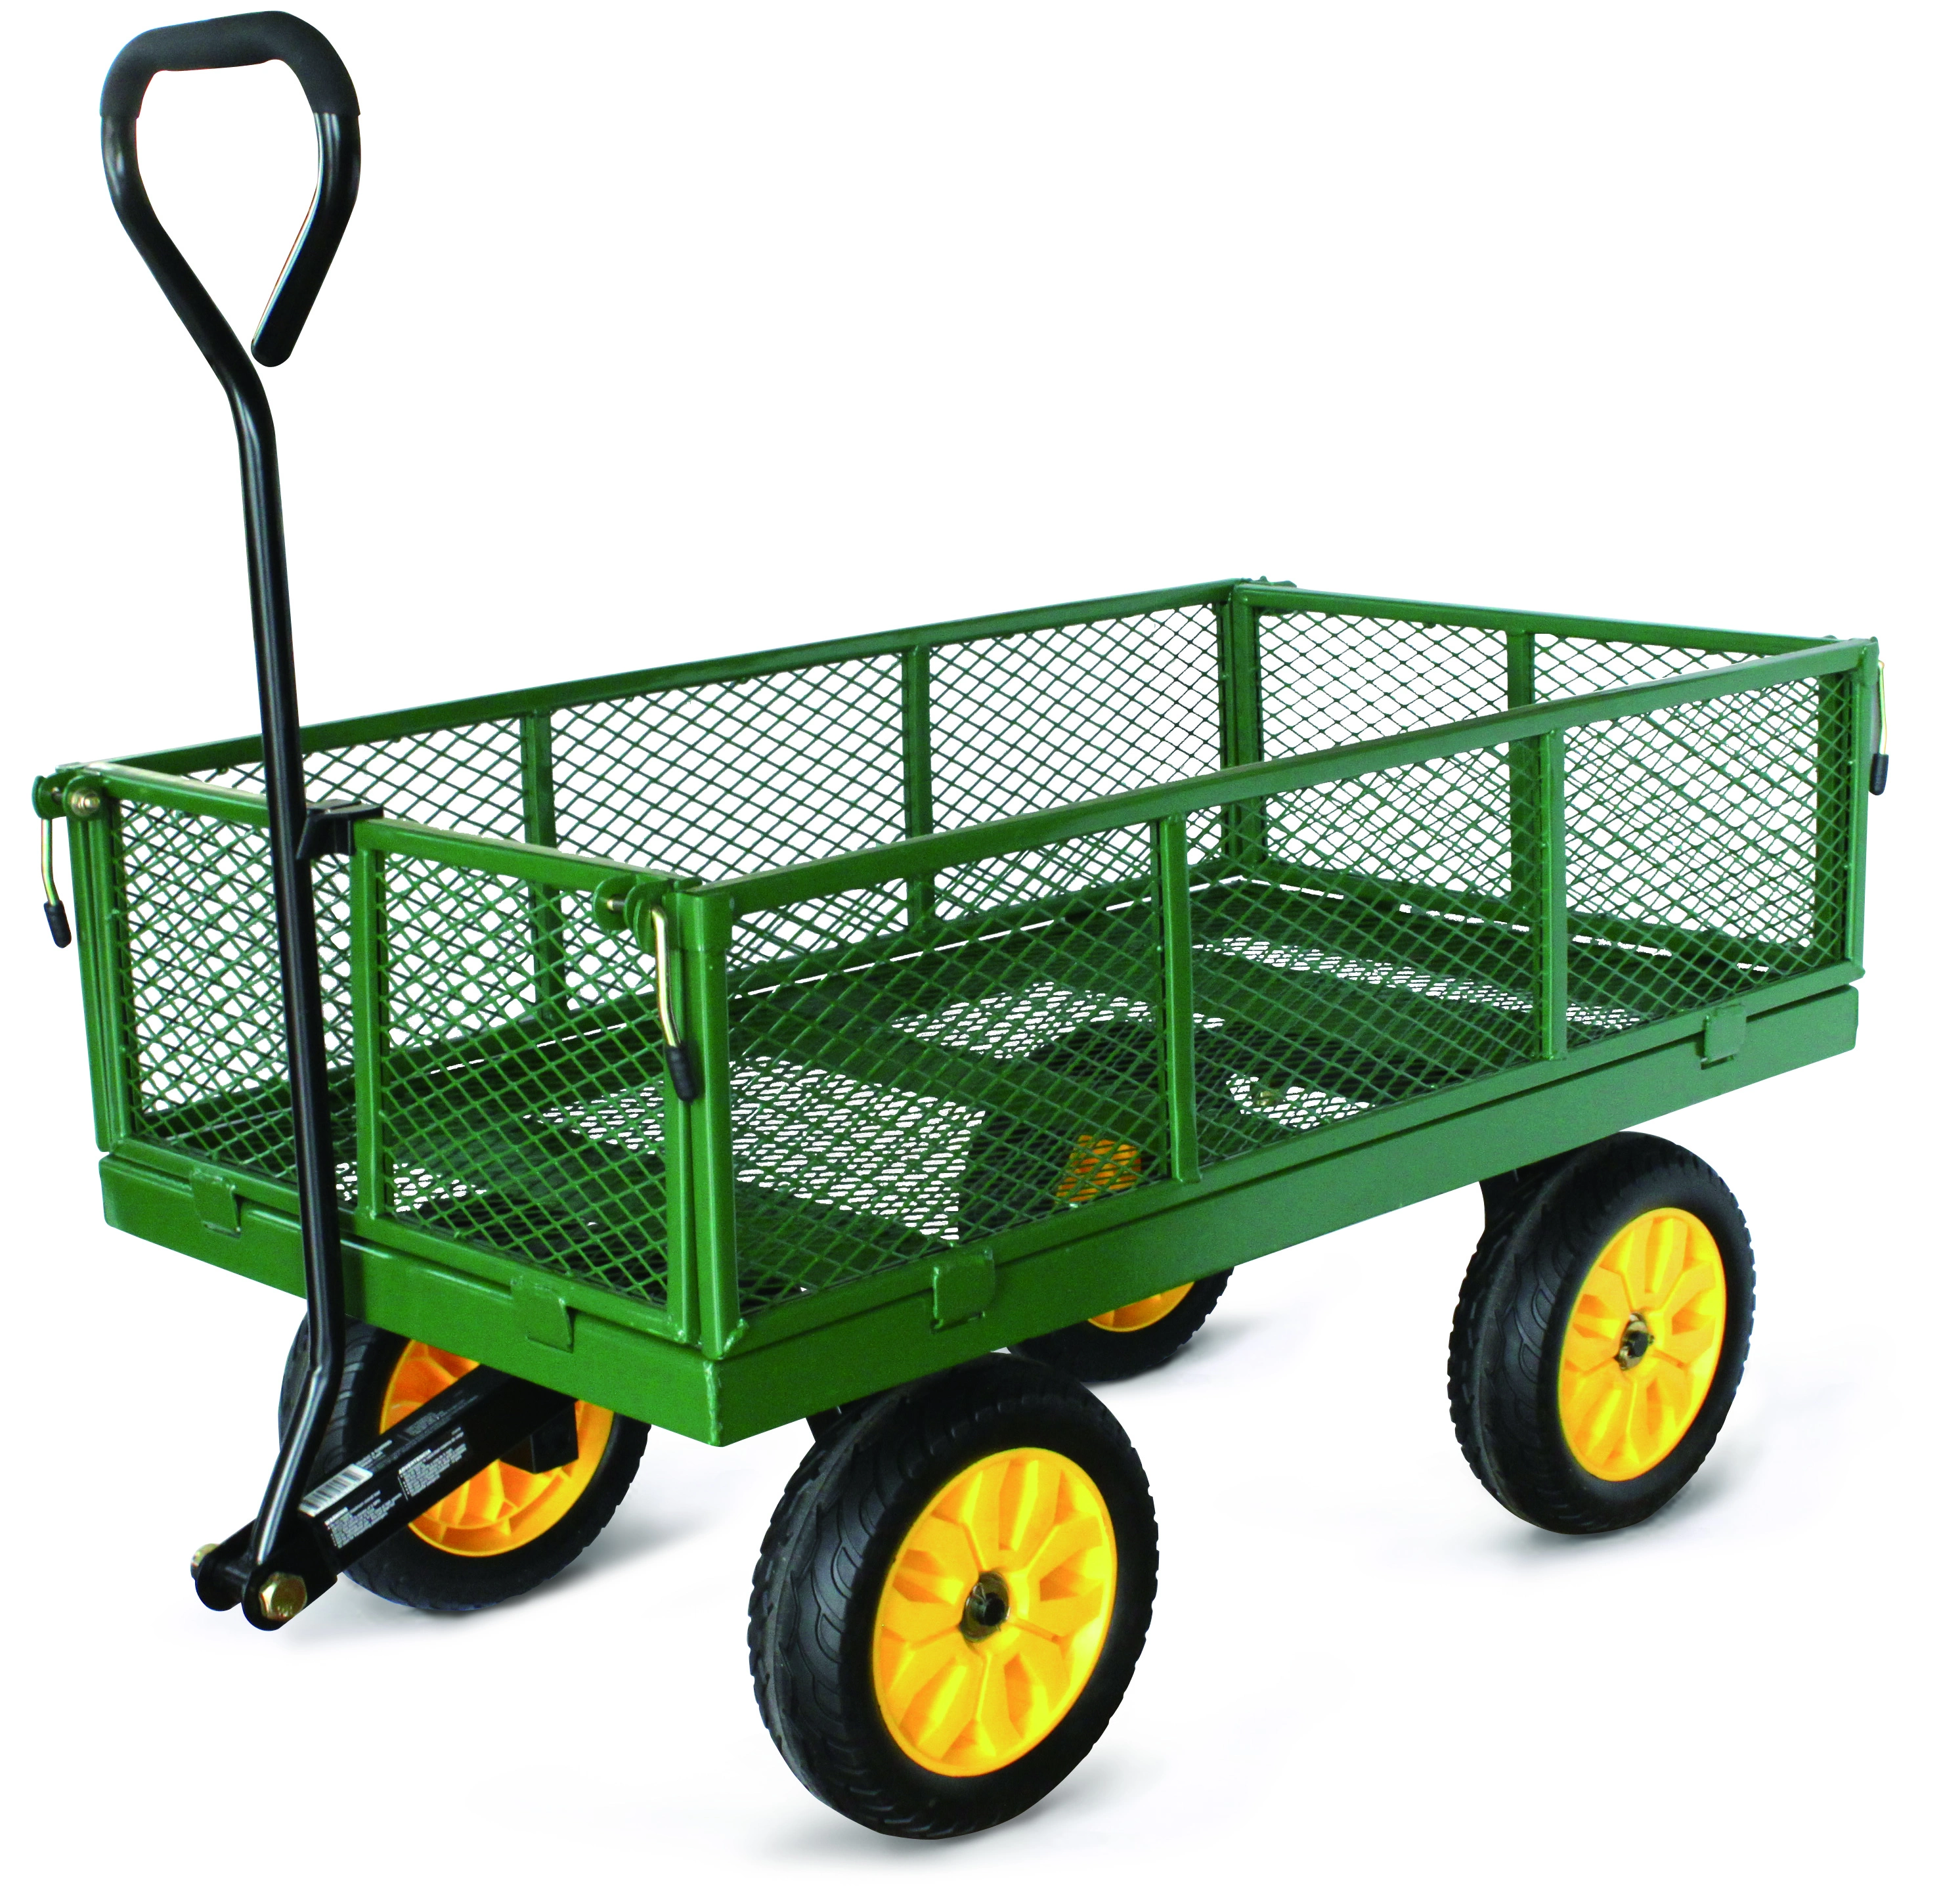 A utility wagon cart provides several benefits across various settings and applications.